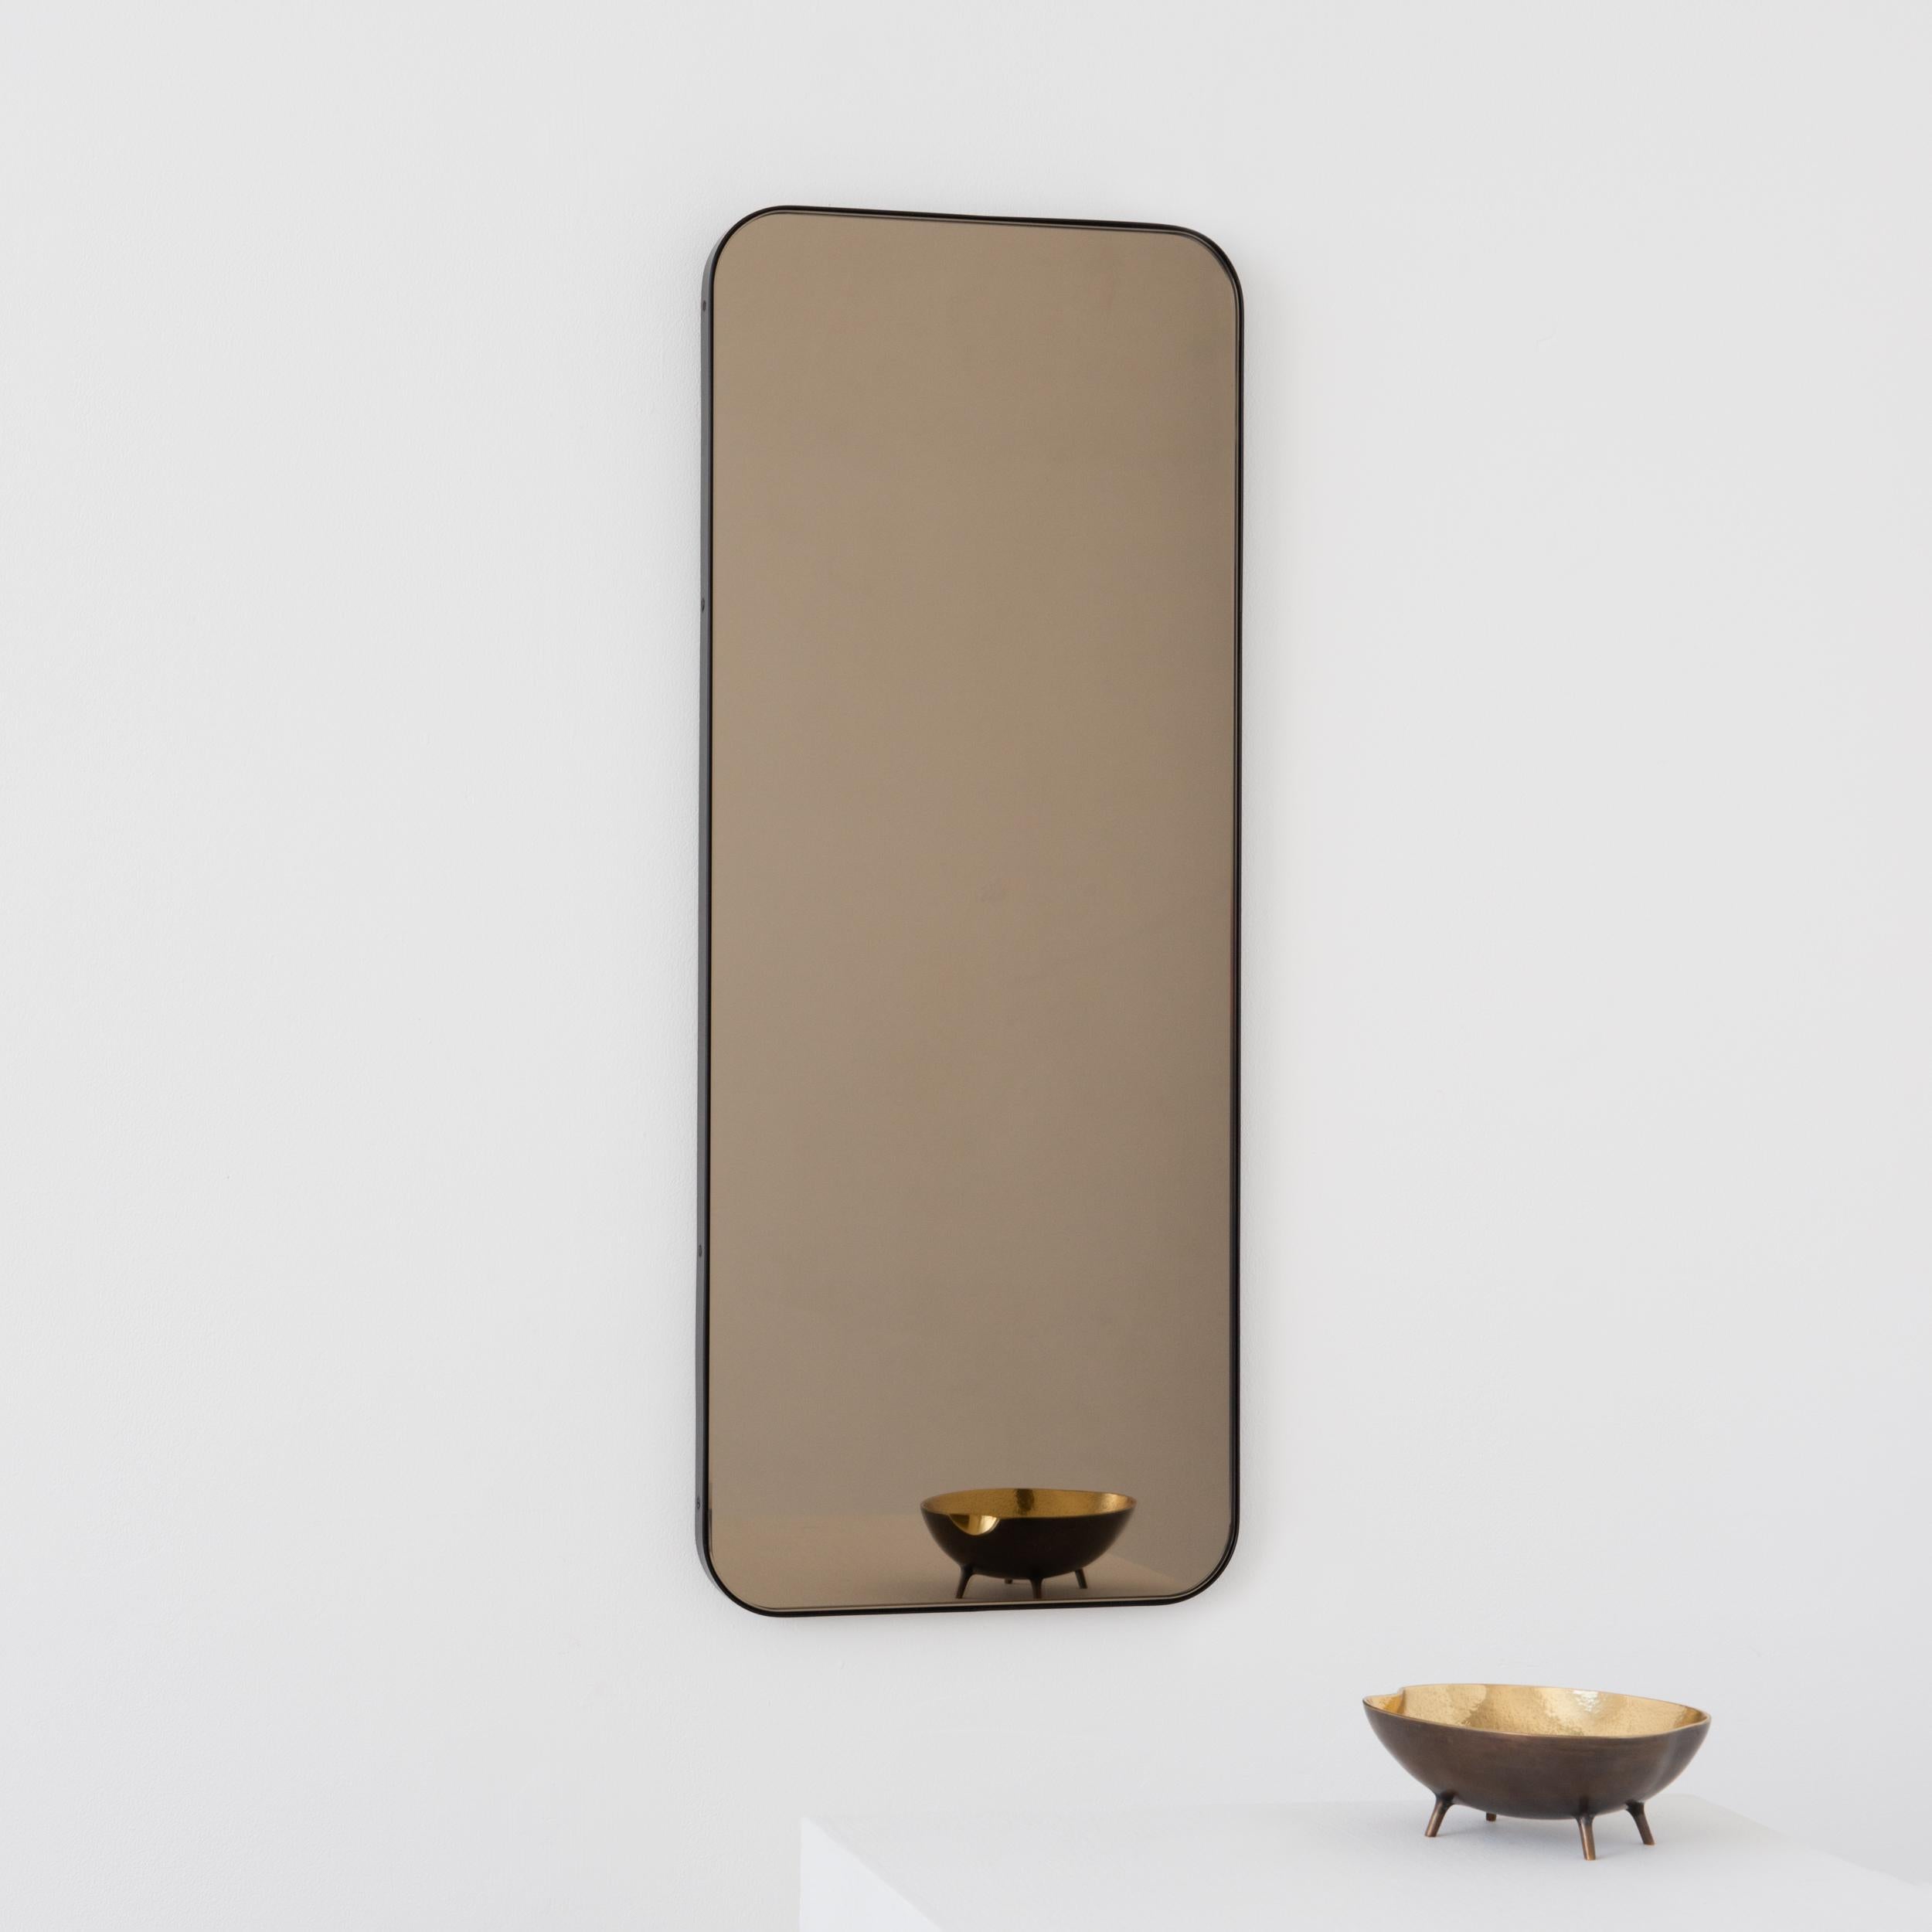 Modern rectangular mirror with an elegant solid bronze patina brass frame. Part of the charming Quadris collection, designed and handcrafted in London, UK. 

Our mirrors are designed with an integrated French cleat (split batten) system that ensures